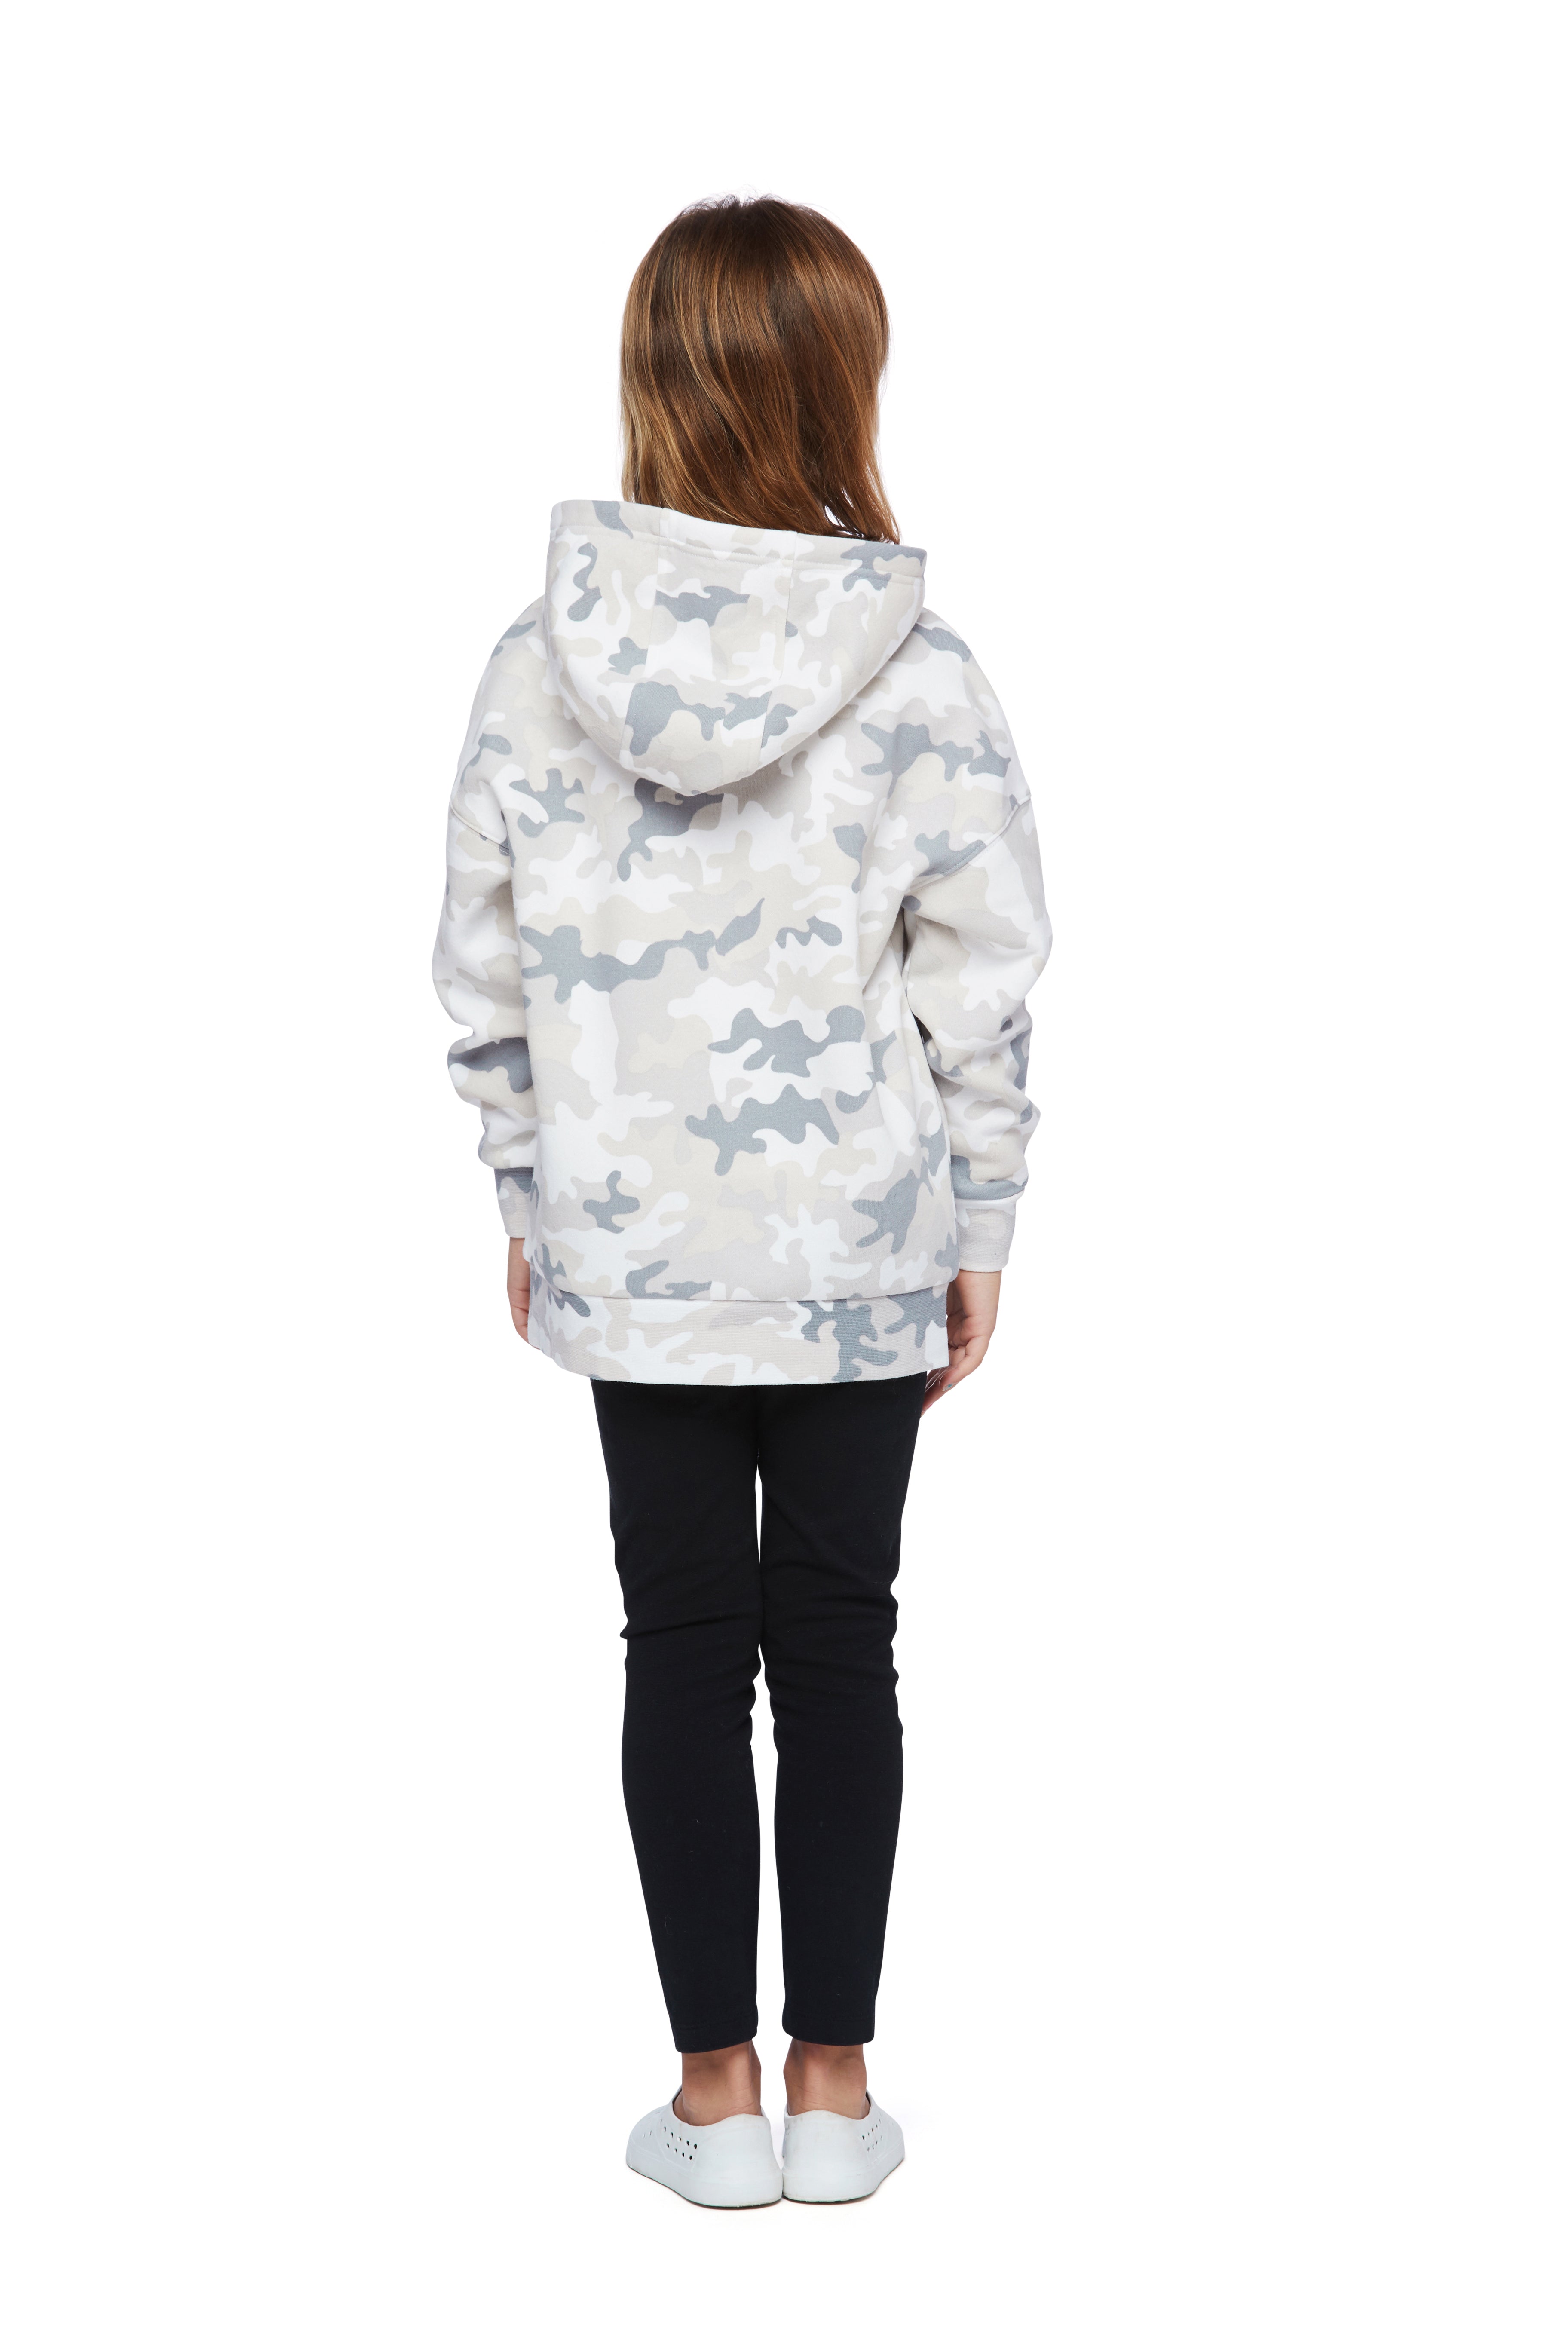 Kids Cooper Hoodie in white camo from Lazypants - always a great buy at a reasonable price.